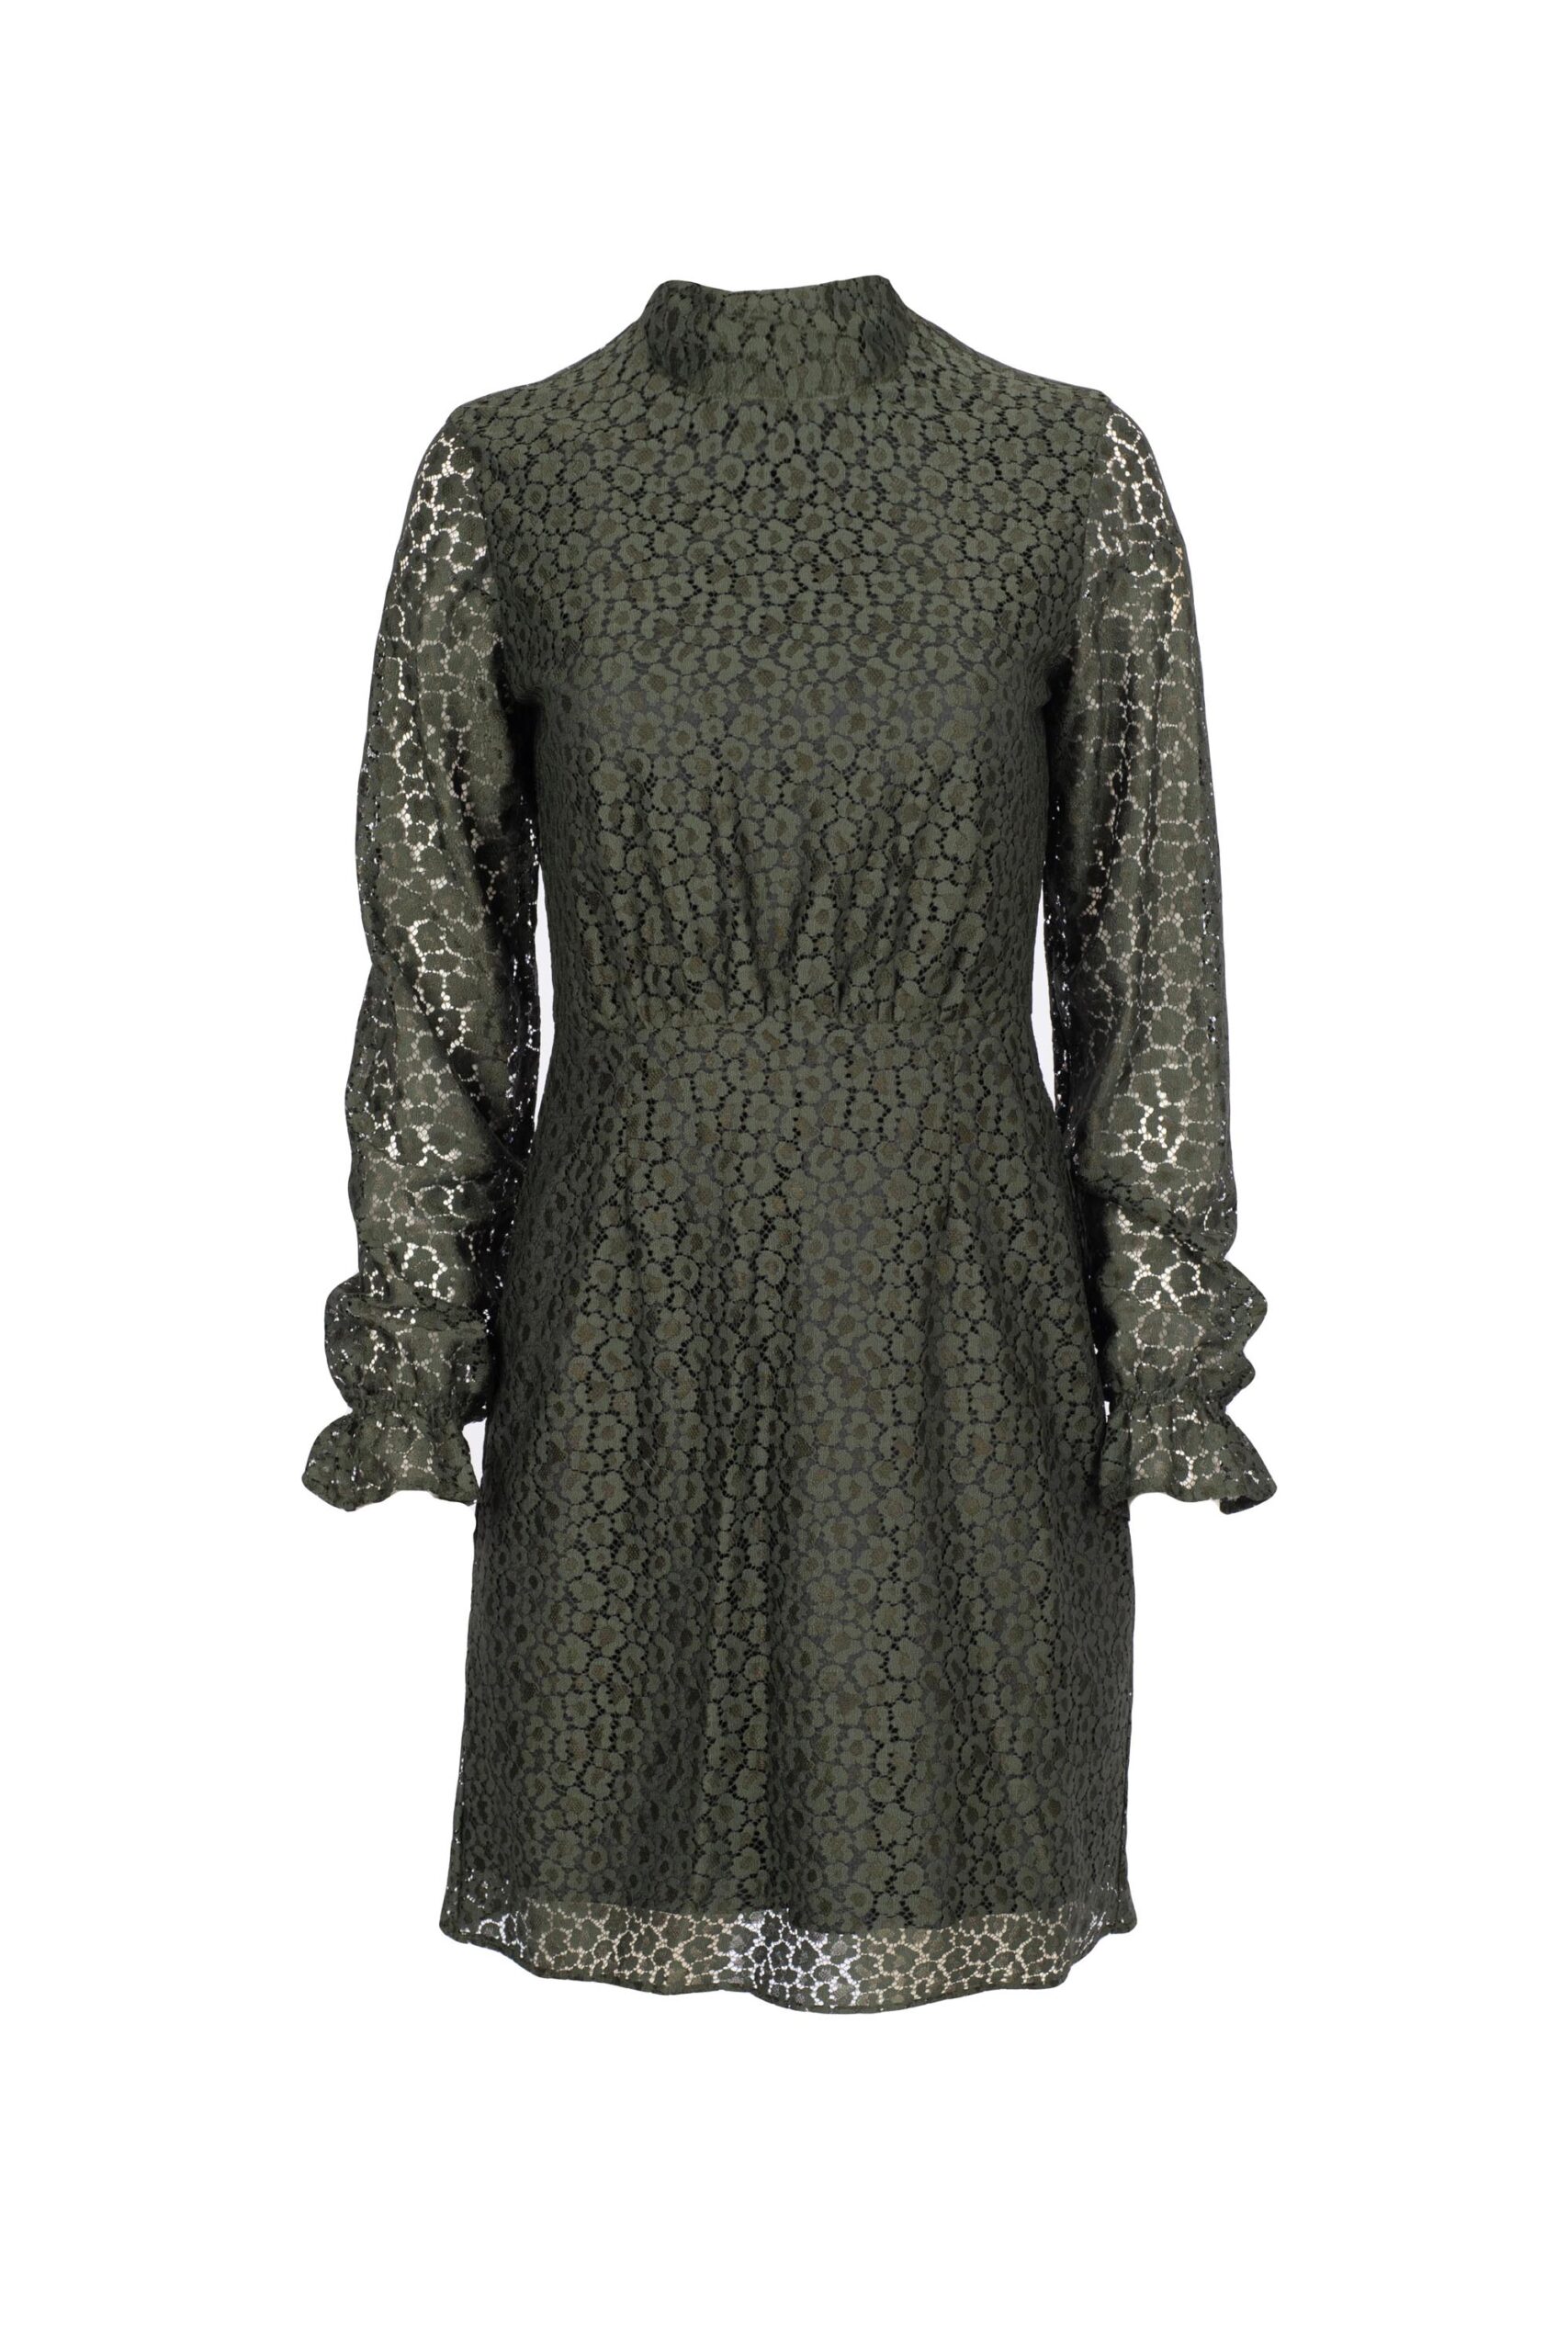 Lace Victorian Style Dress with Waist Ruching